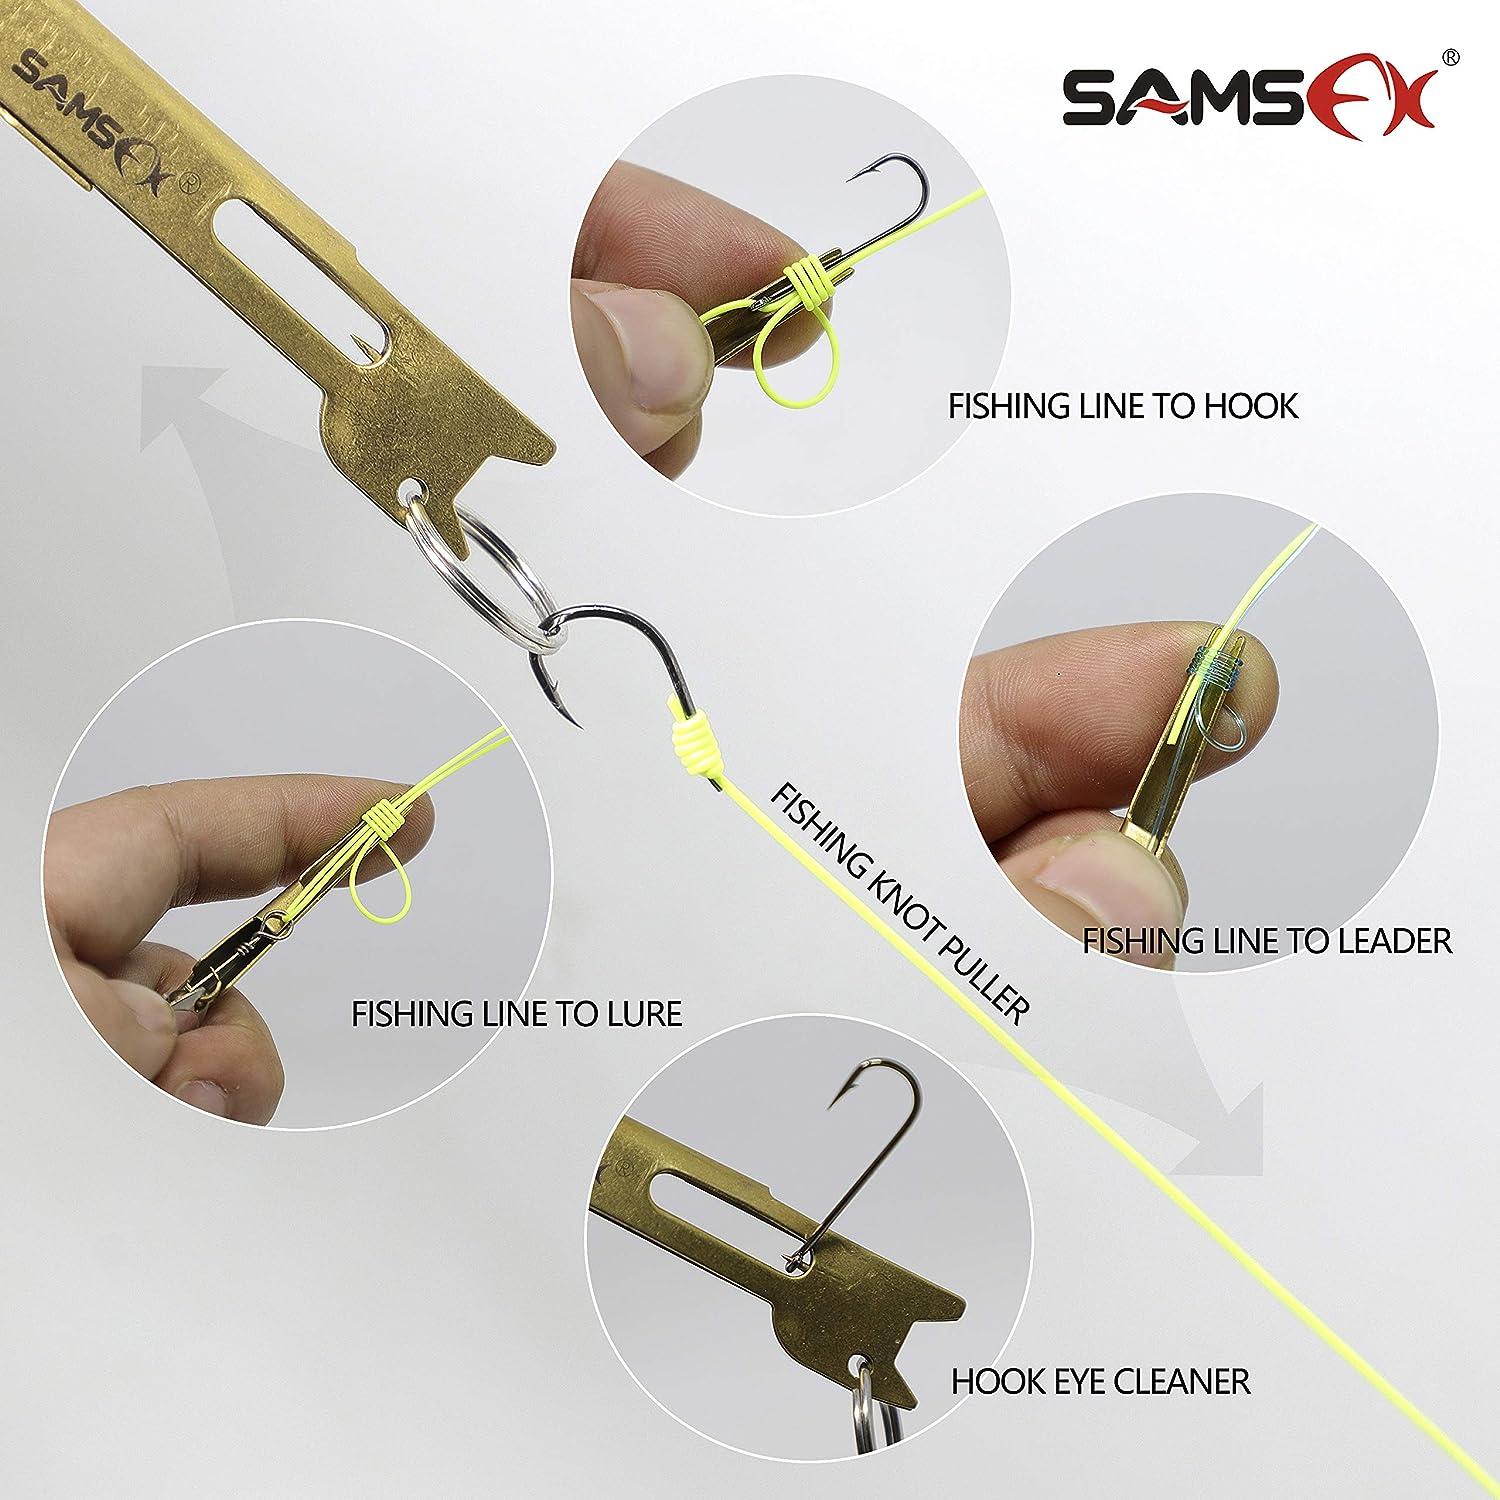 SAMSFX Fishing Line and Hook Knot Tying Tool Kit 3 Knot Tyers with